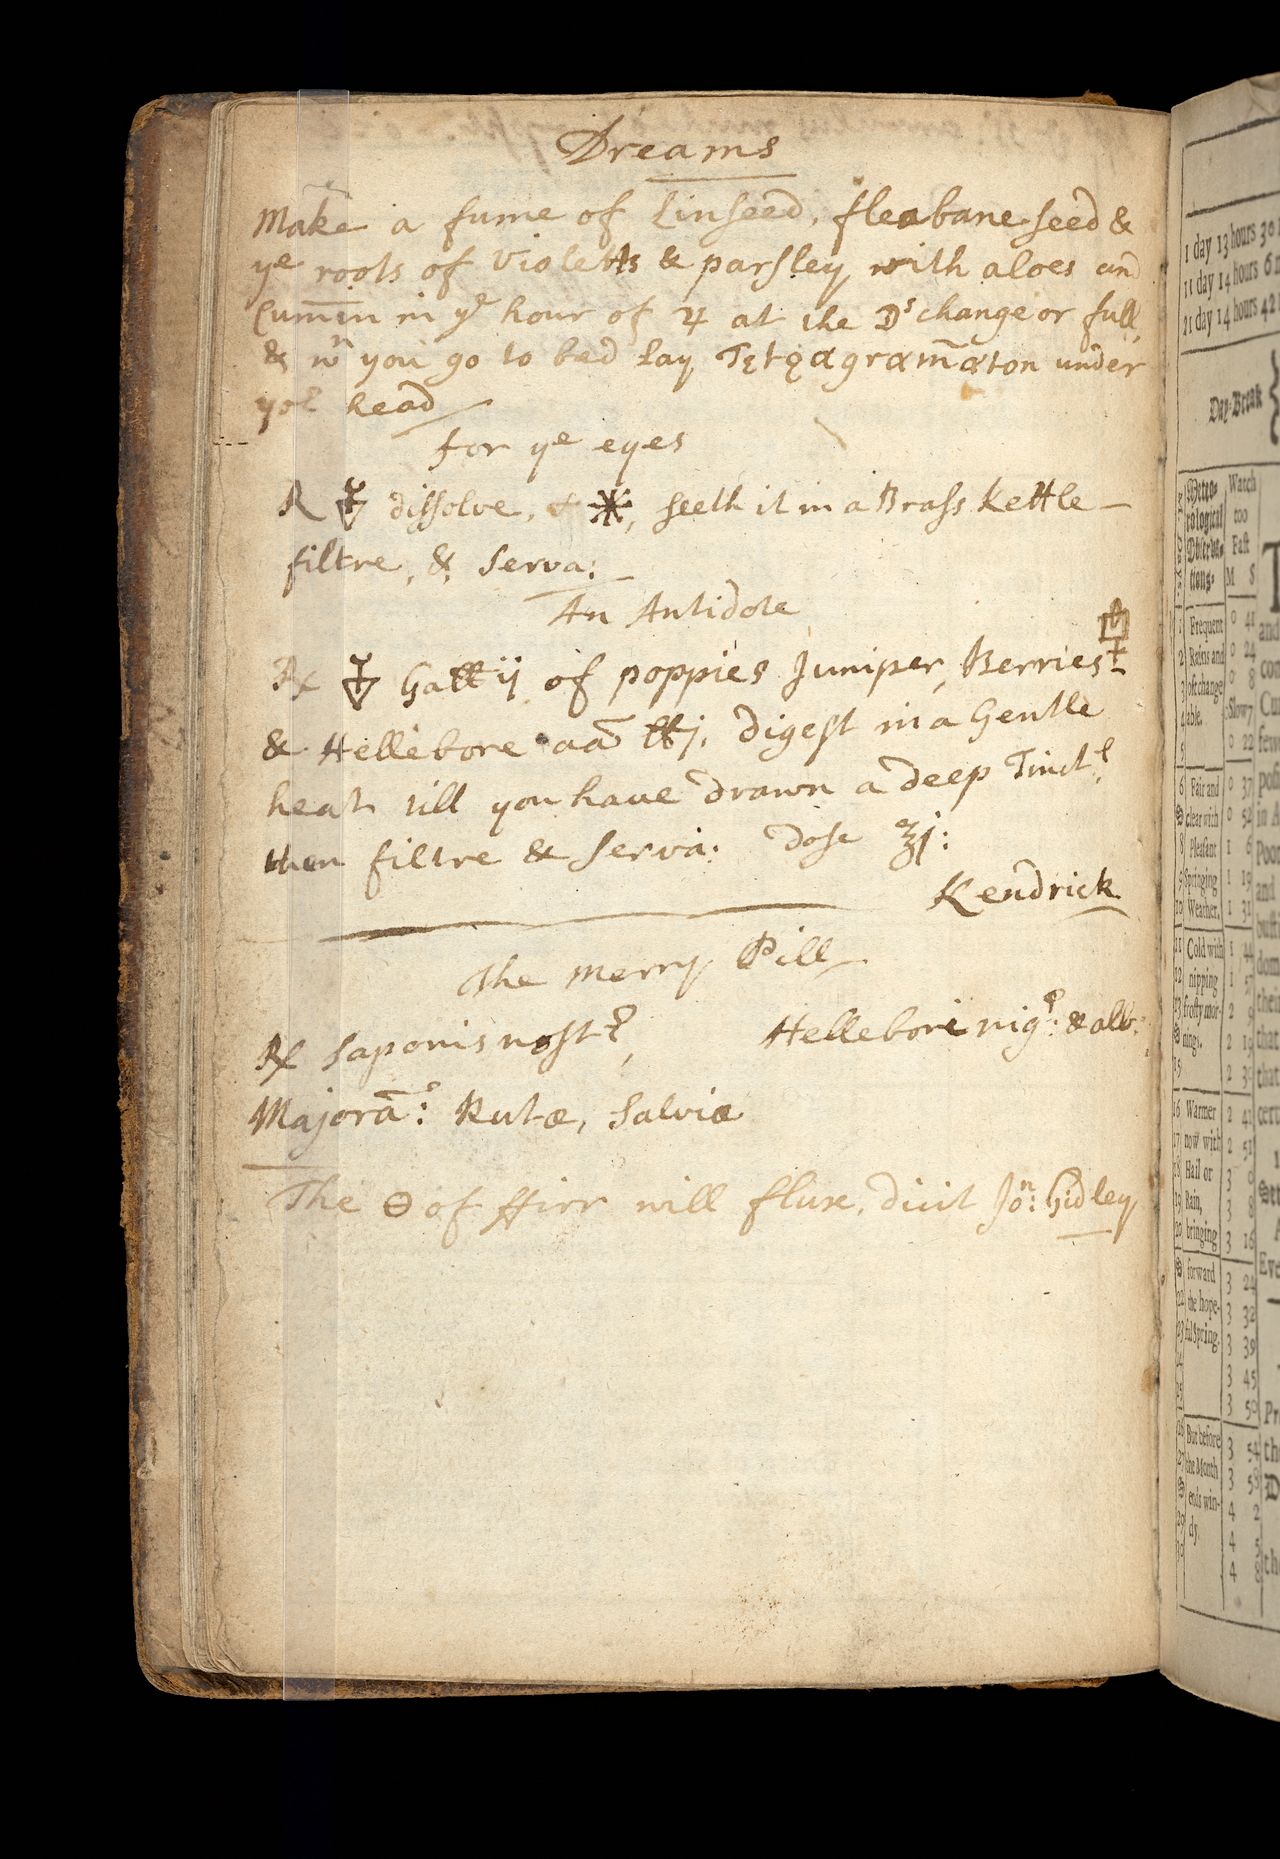 George Parker, <em>A double ephemeris, for the year of our Lord, 1700...</em>, London, printed for the author, at the Ball and Star in Salisbury-Court, and sold by W. Hunt at the Ball in Paul's Ally in St. Paul's Church-Yard, 1700, State Library Victoria, Melbourne (RAREEMM 325/24)